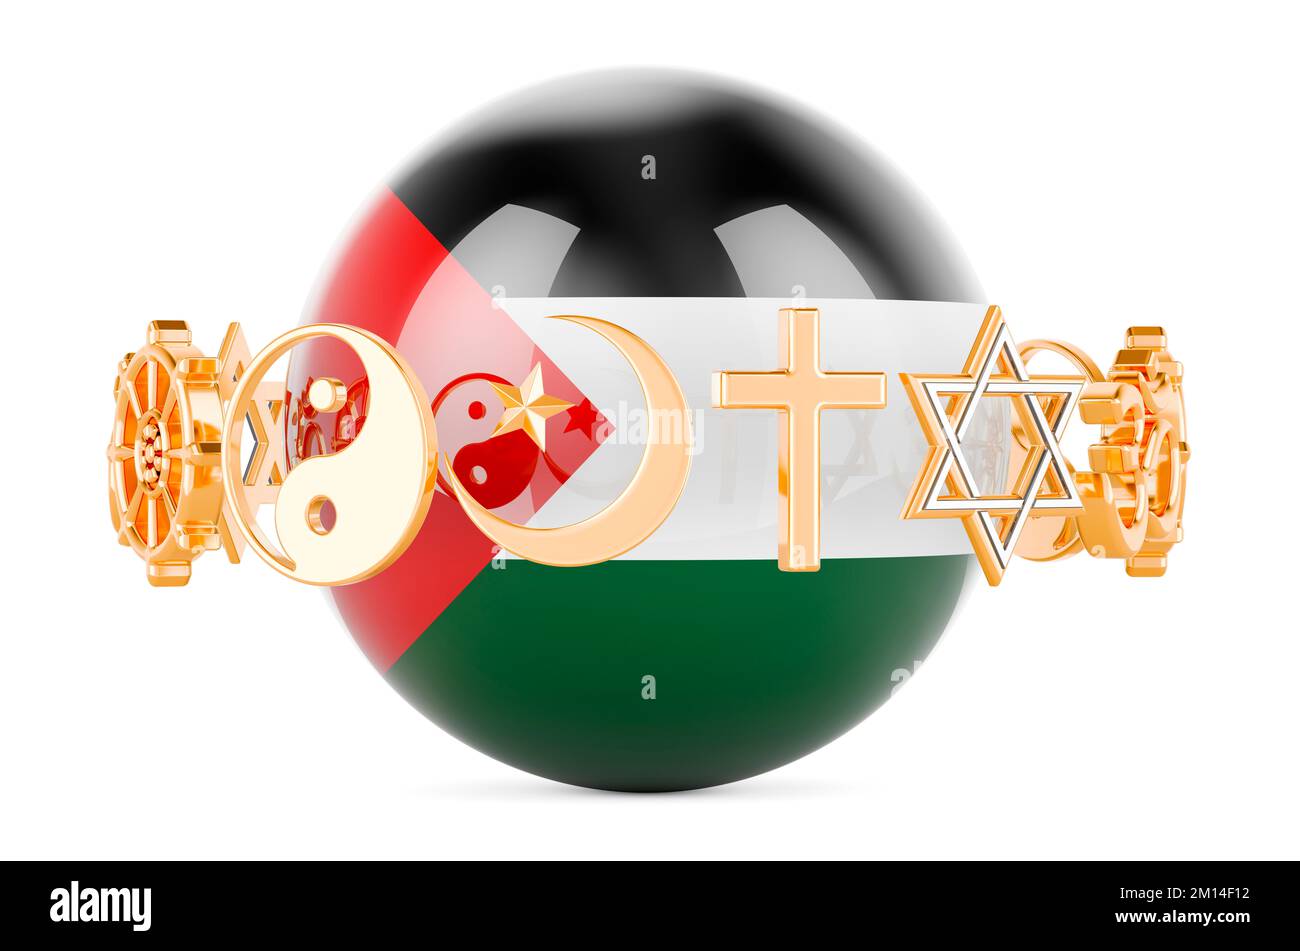 Palestinian flag painted on sphere with religions symbols around, 3D rendering isolated on white background Stock Photo